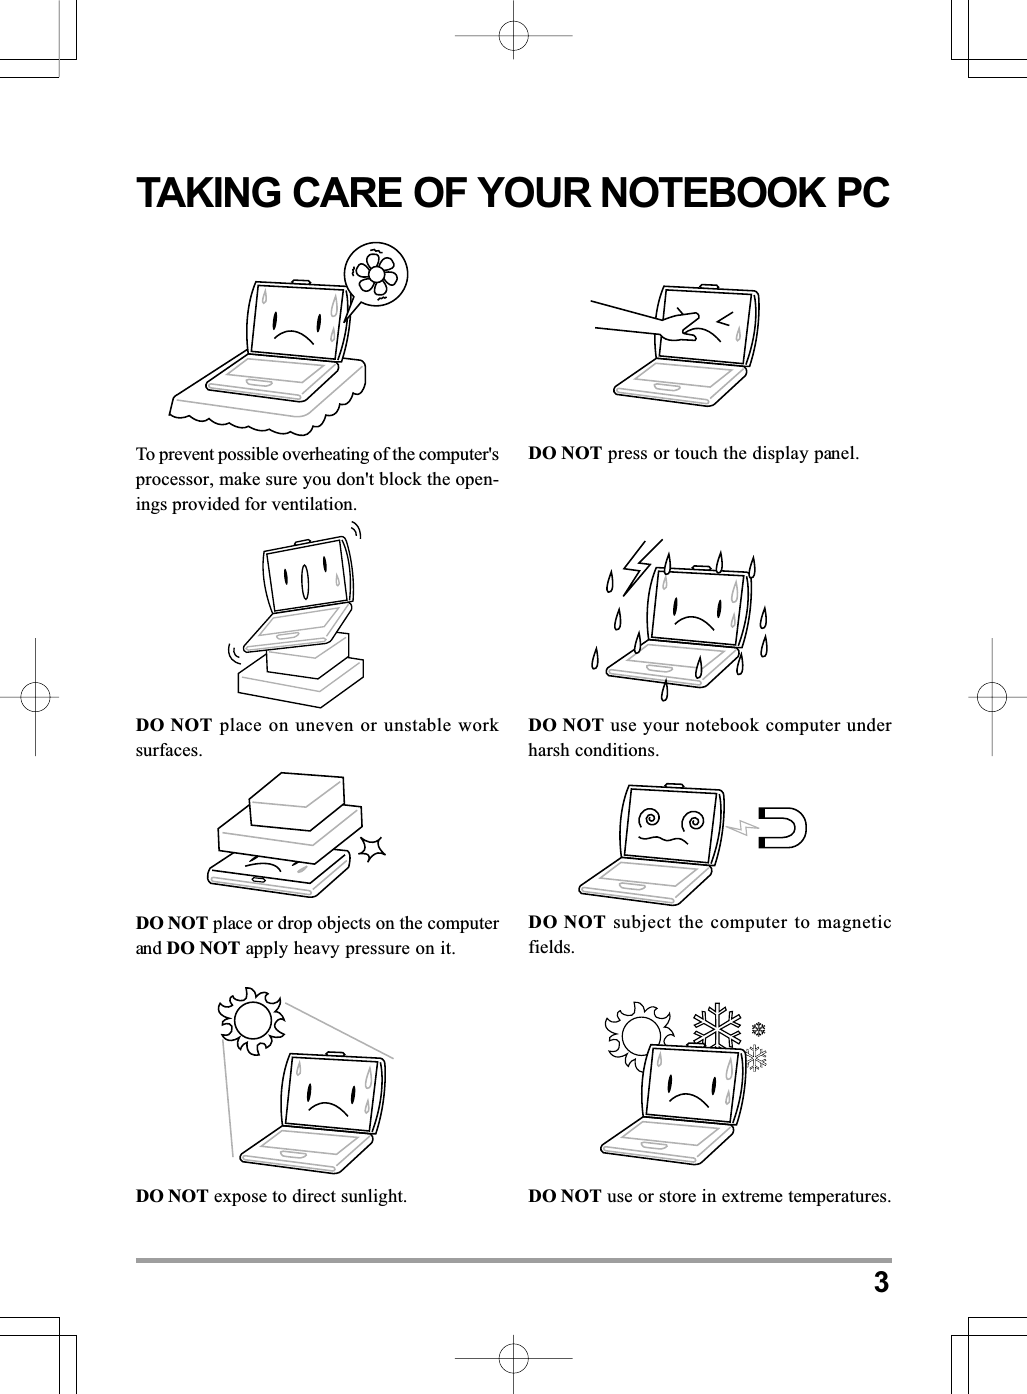 3TAKING CARE OF YOUR NOTEBOOK PCDO NOT place or drop objects on the computerand DO NOT apply heavy pressure on it.DO NOT subject the computer to magneticfields.To prevent possible overheating of the computer&apos;sprocessor, make sure you don&apos;t block the open-ings provided for ventilation.DO NOT press or touch the display panel.DO NOT place on uneven or unstable worksurfaces.DO NOT use your notebook computer underharsh conditions.DO NOT expose to direct sunlight. DO NOT use or store in extreme temperatures.